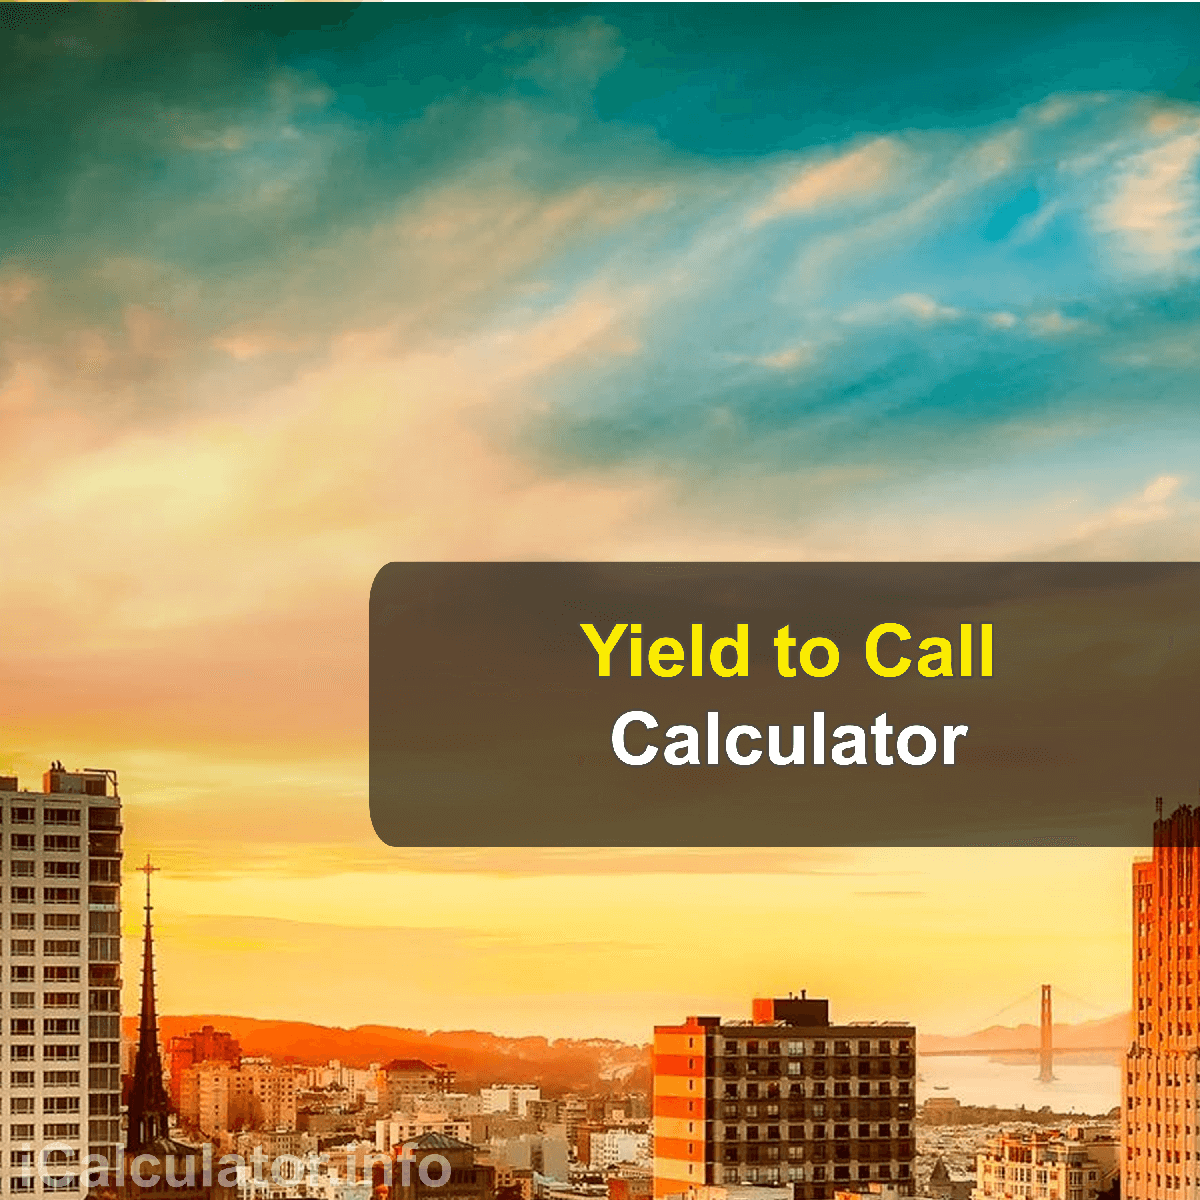 Yield to Call Calculator. This image provides details of how to calculate Yield to Call using a calculator and notepad. By using the Yield to Call formula, the Yield to Call Calculator provides a true calculation of the yield to call on your bonds with several parameters by editing the details to get the results for a different calculation